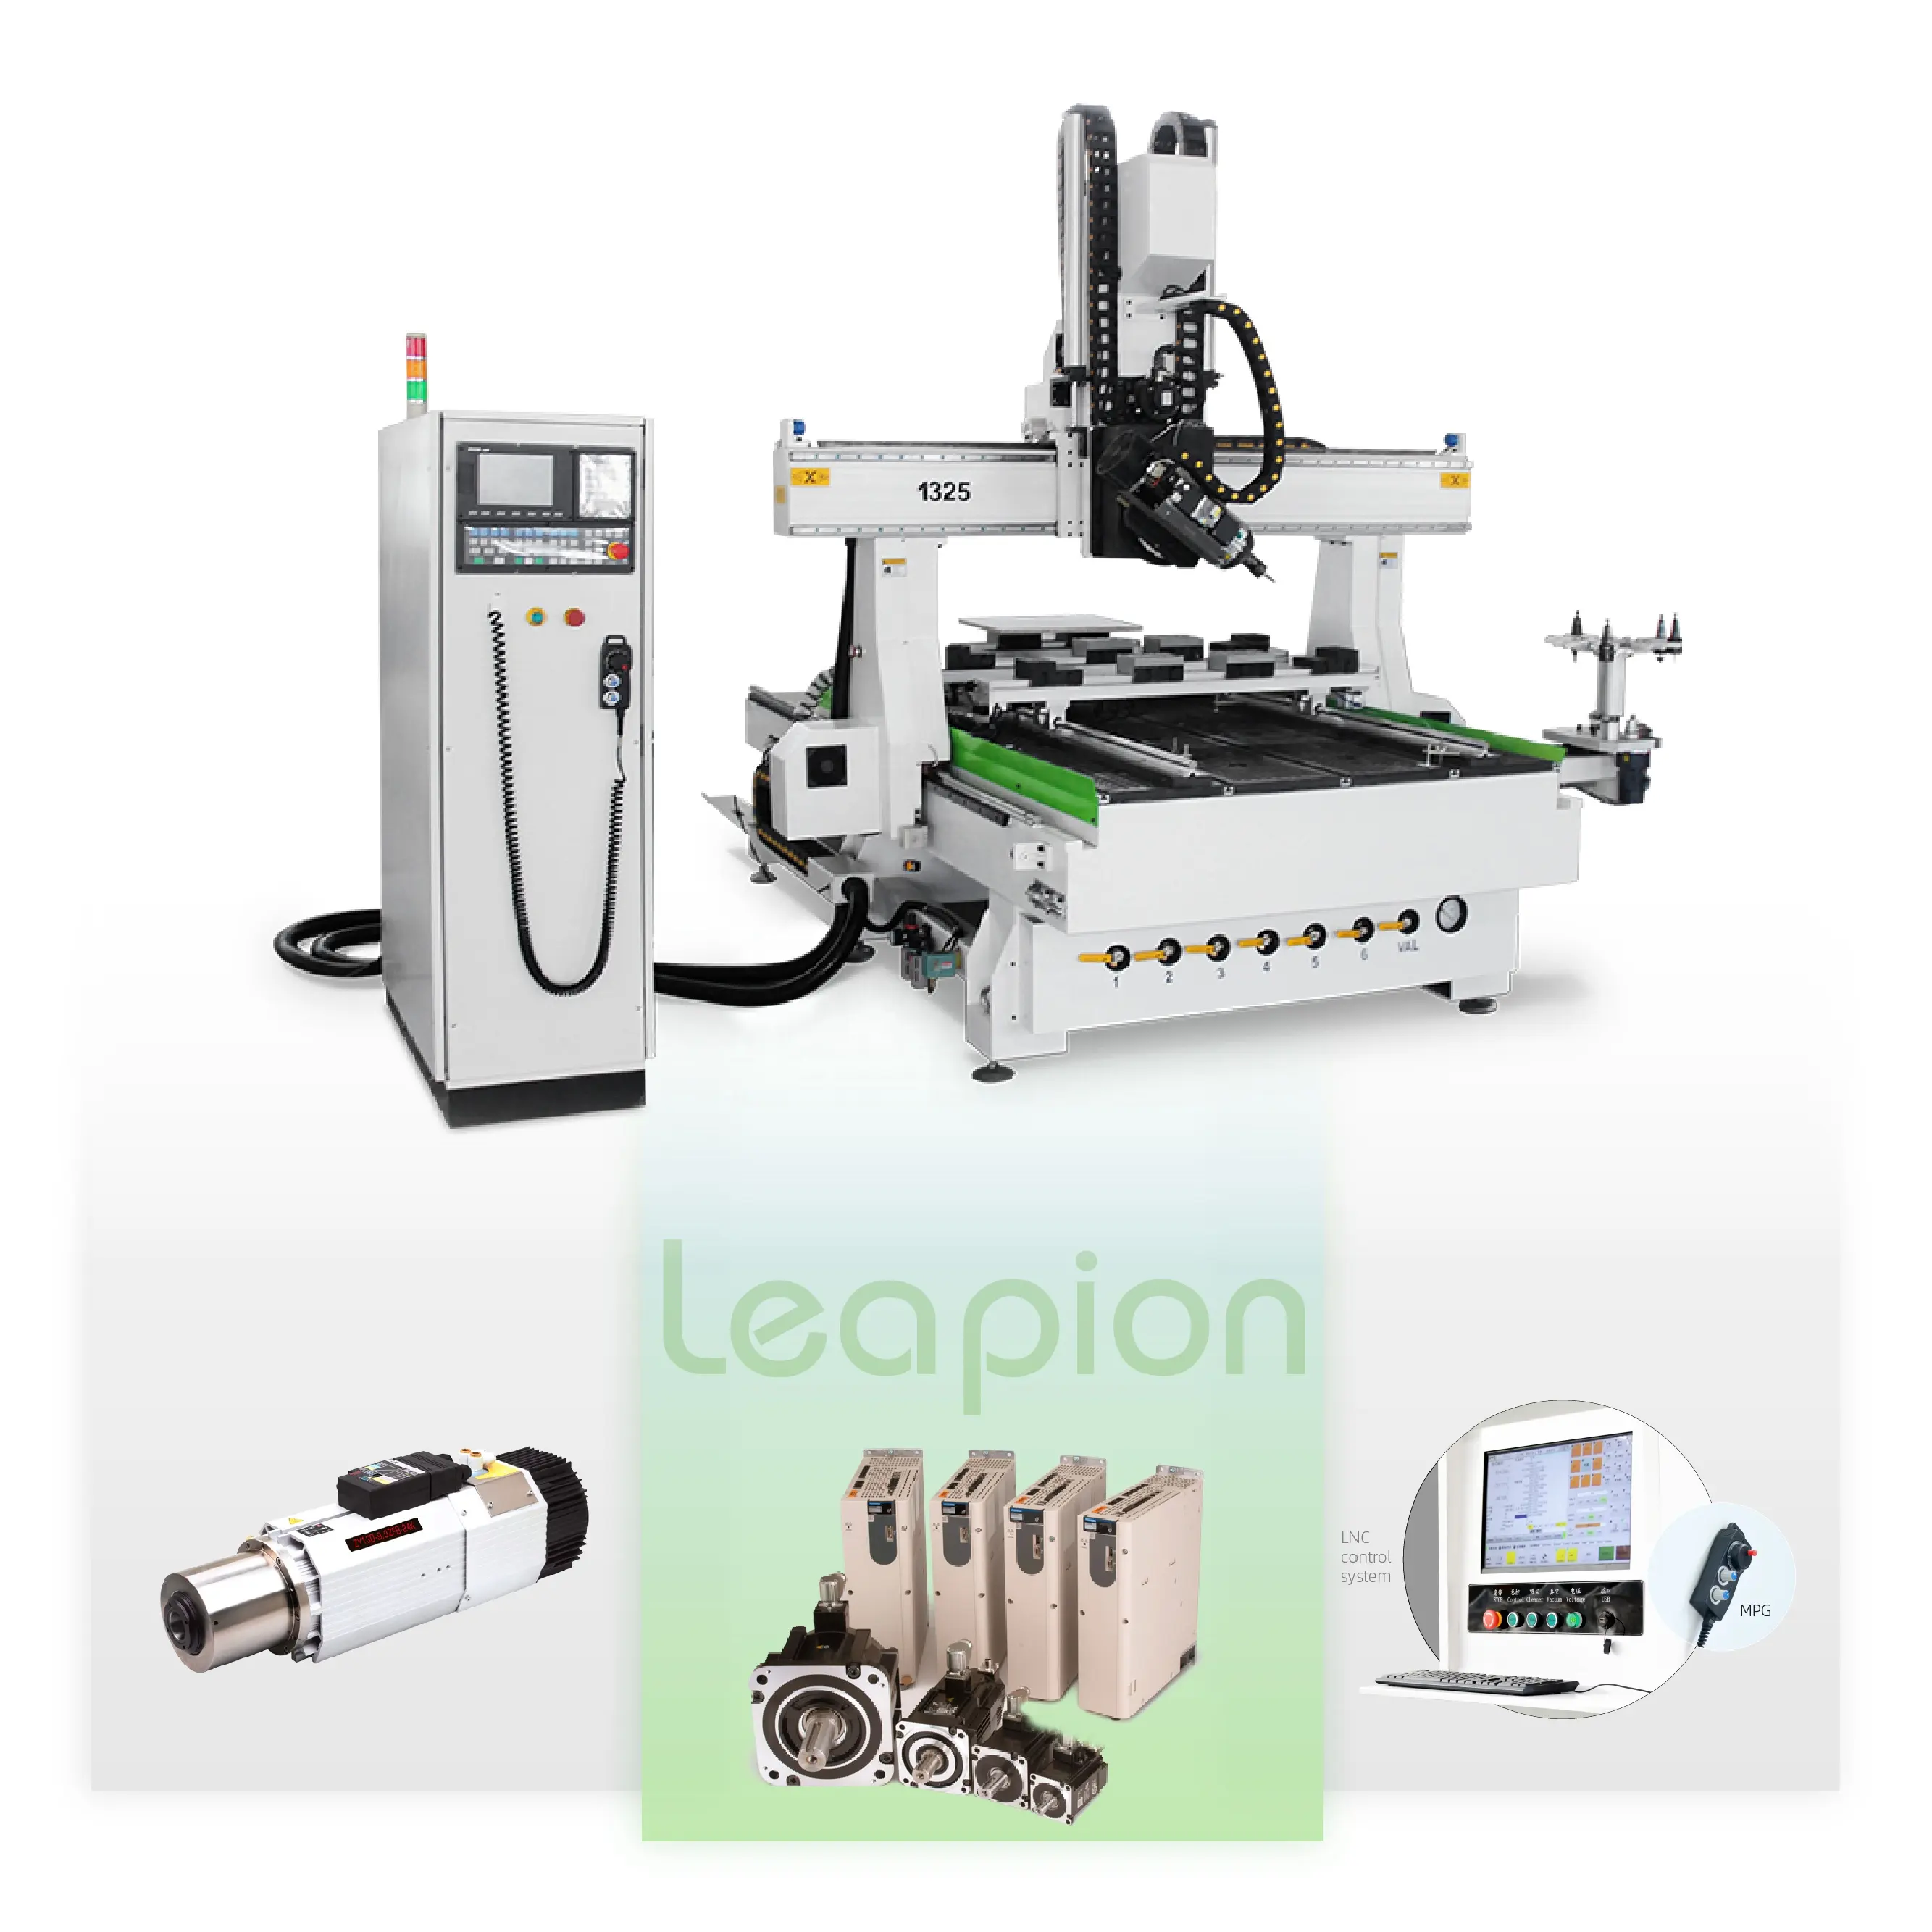 Leapion Cnc Router 4 Axis Steel 4 Axis Cnc Router Woodworking Machine 5 Axis Cnc Router Machine Carving